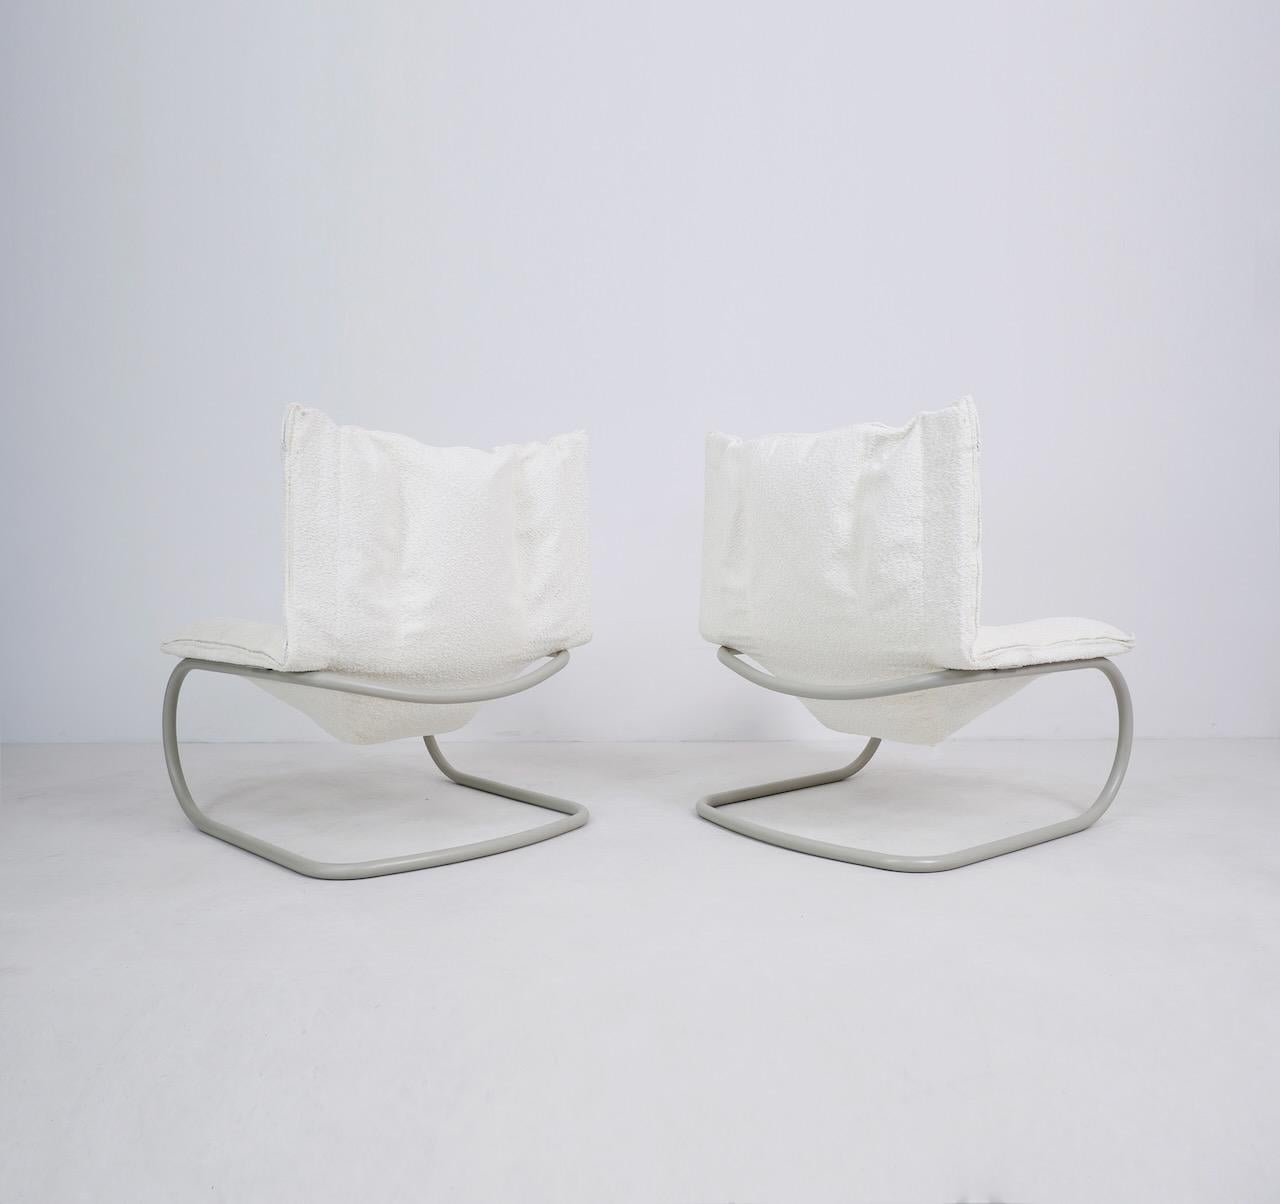 Cantilever lounge chairs designed by Marzio Cecchi, the visionary Firenze born Architect, Designer and Artist. 

The seat of the chairs are upholstered in a light cream boucle and sit on a tubular steel cantilever base. They are extremely